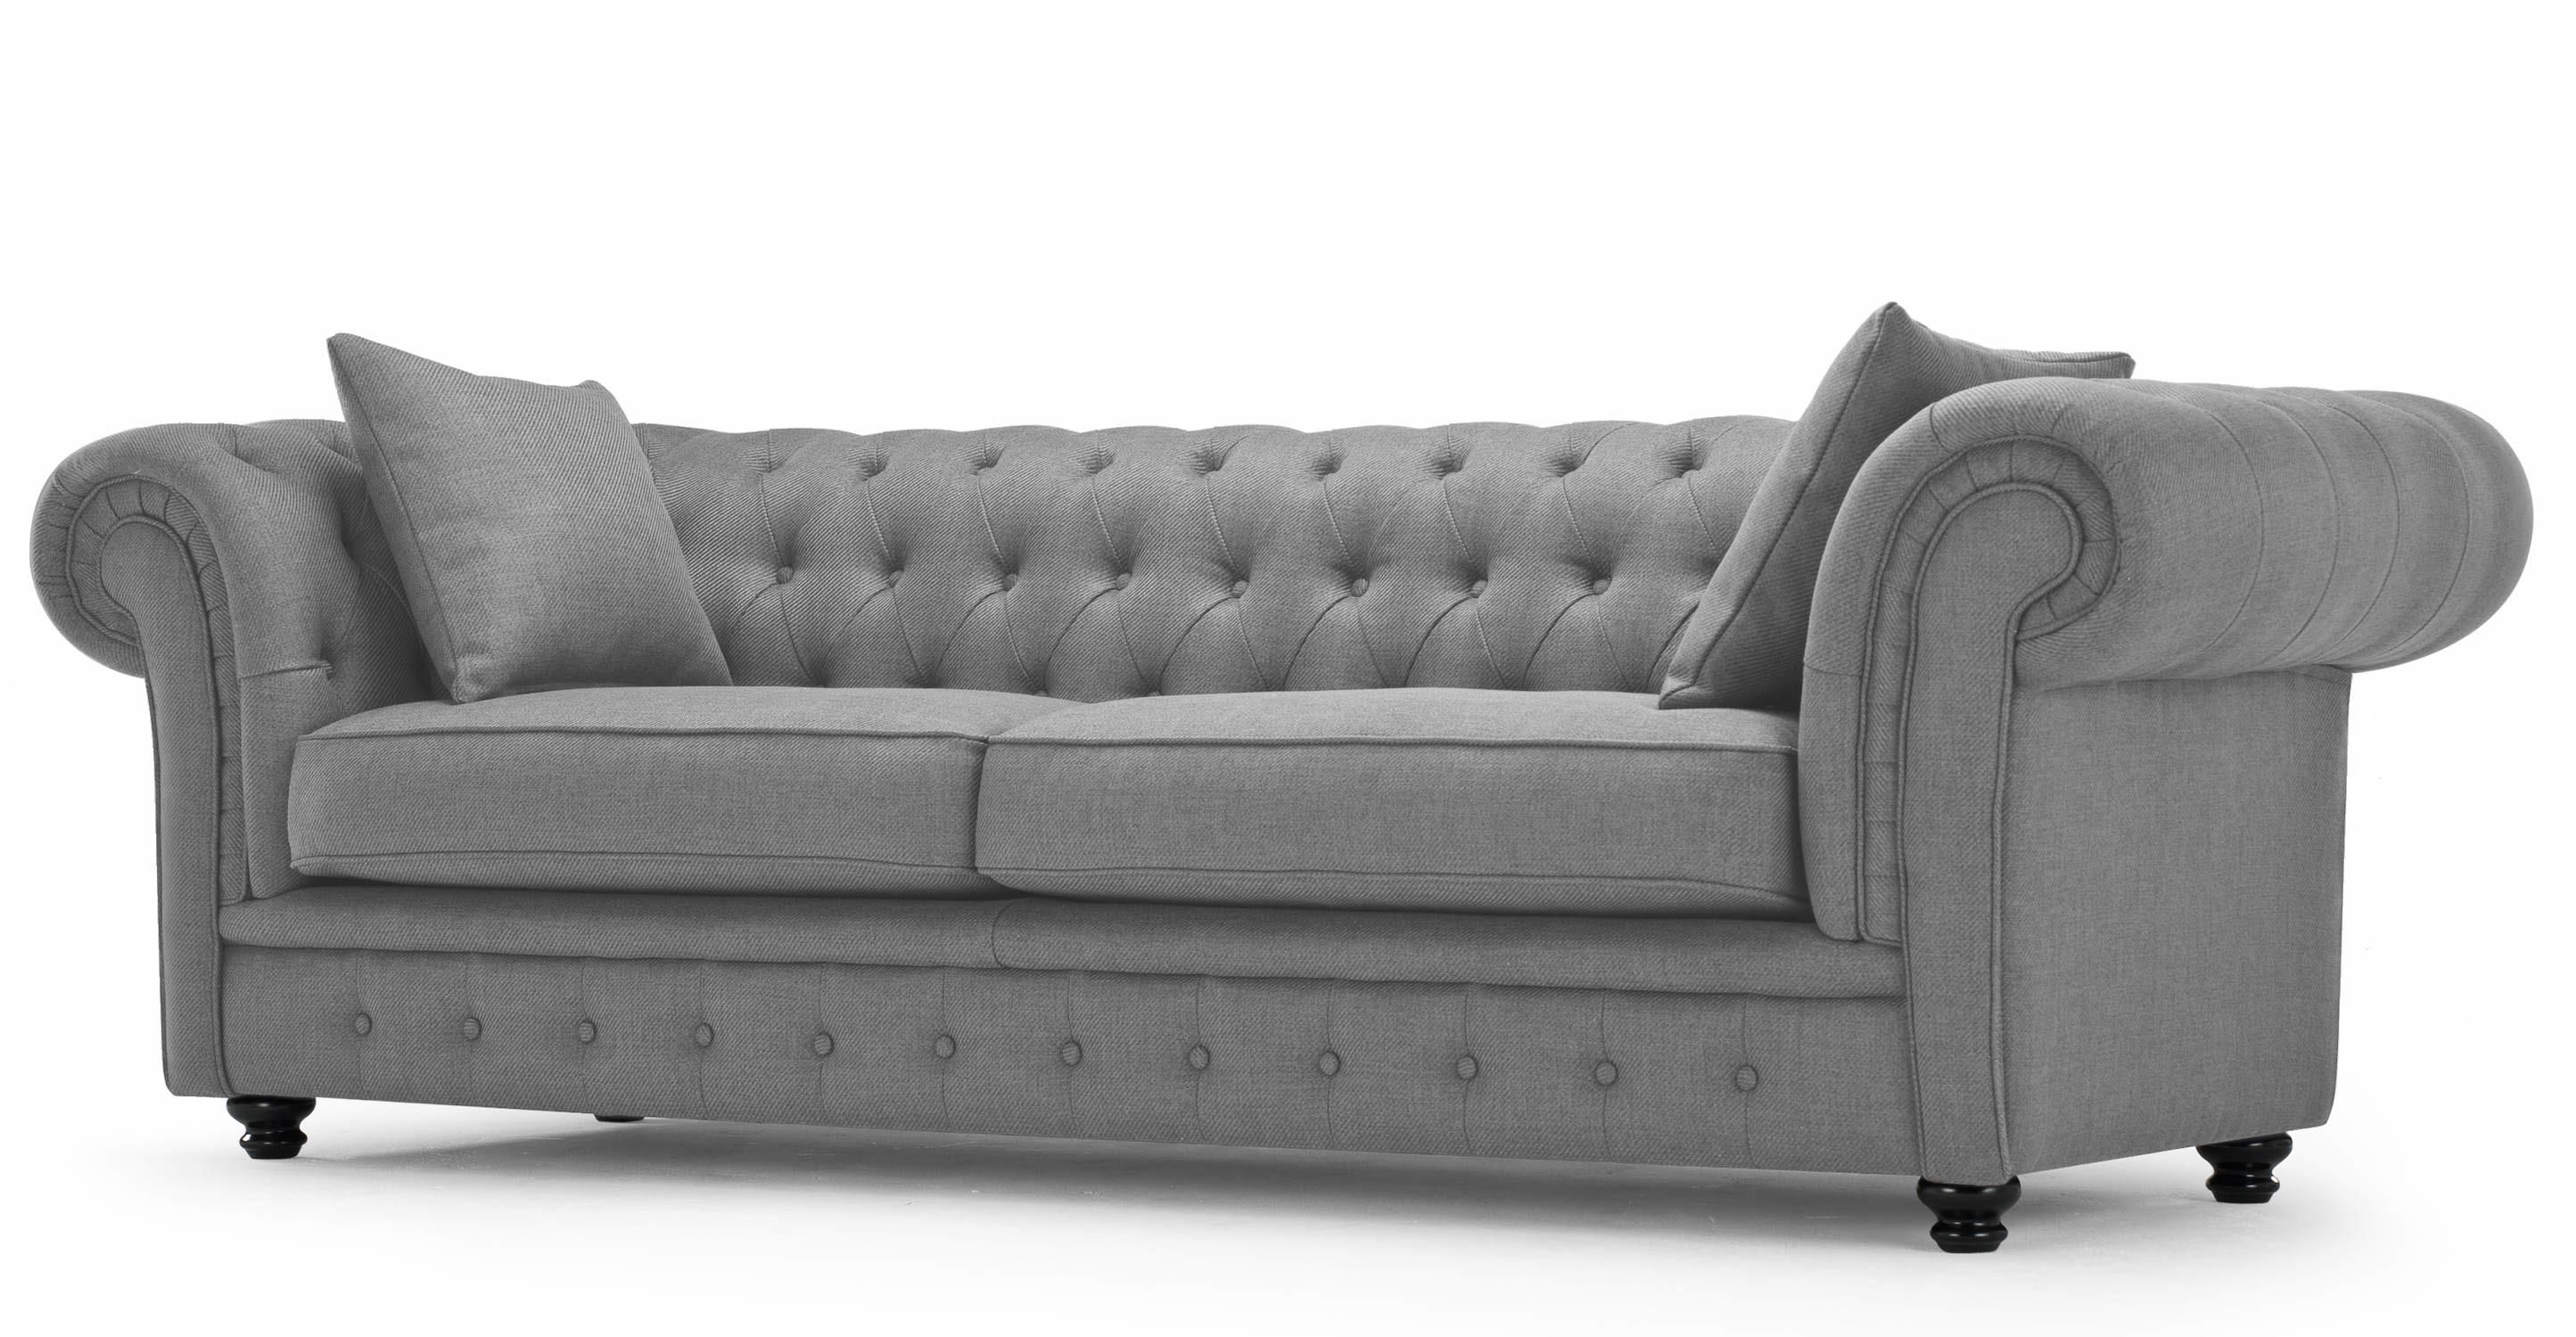 Cheap Grey Sofas Uk | Tehranmix Decoration Intended For Small Grey Sofas (View 12 of 20)